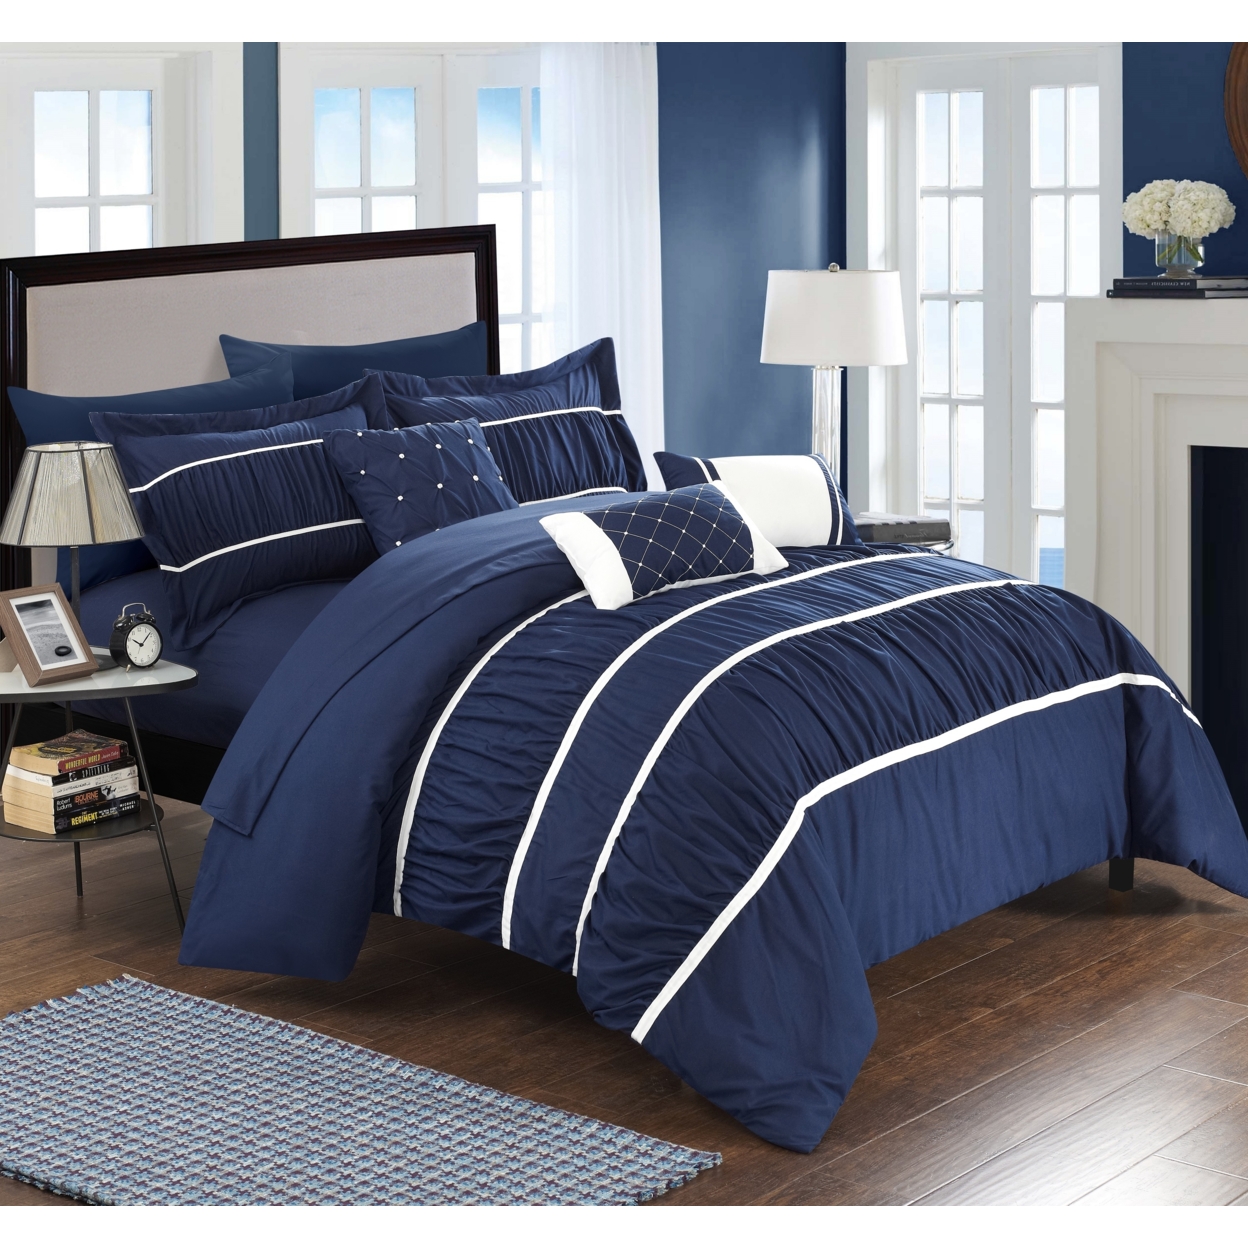 10-Piece Aero Pleated & Ruffled Bed In A Bag Comforter And Sheet Set - Navy, Queen